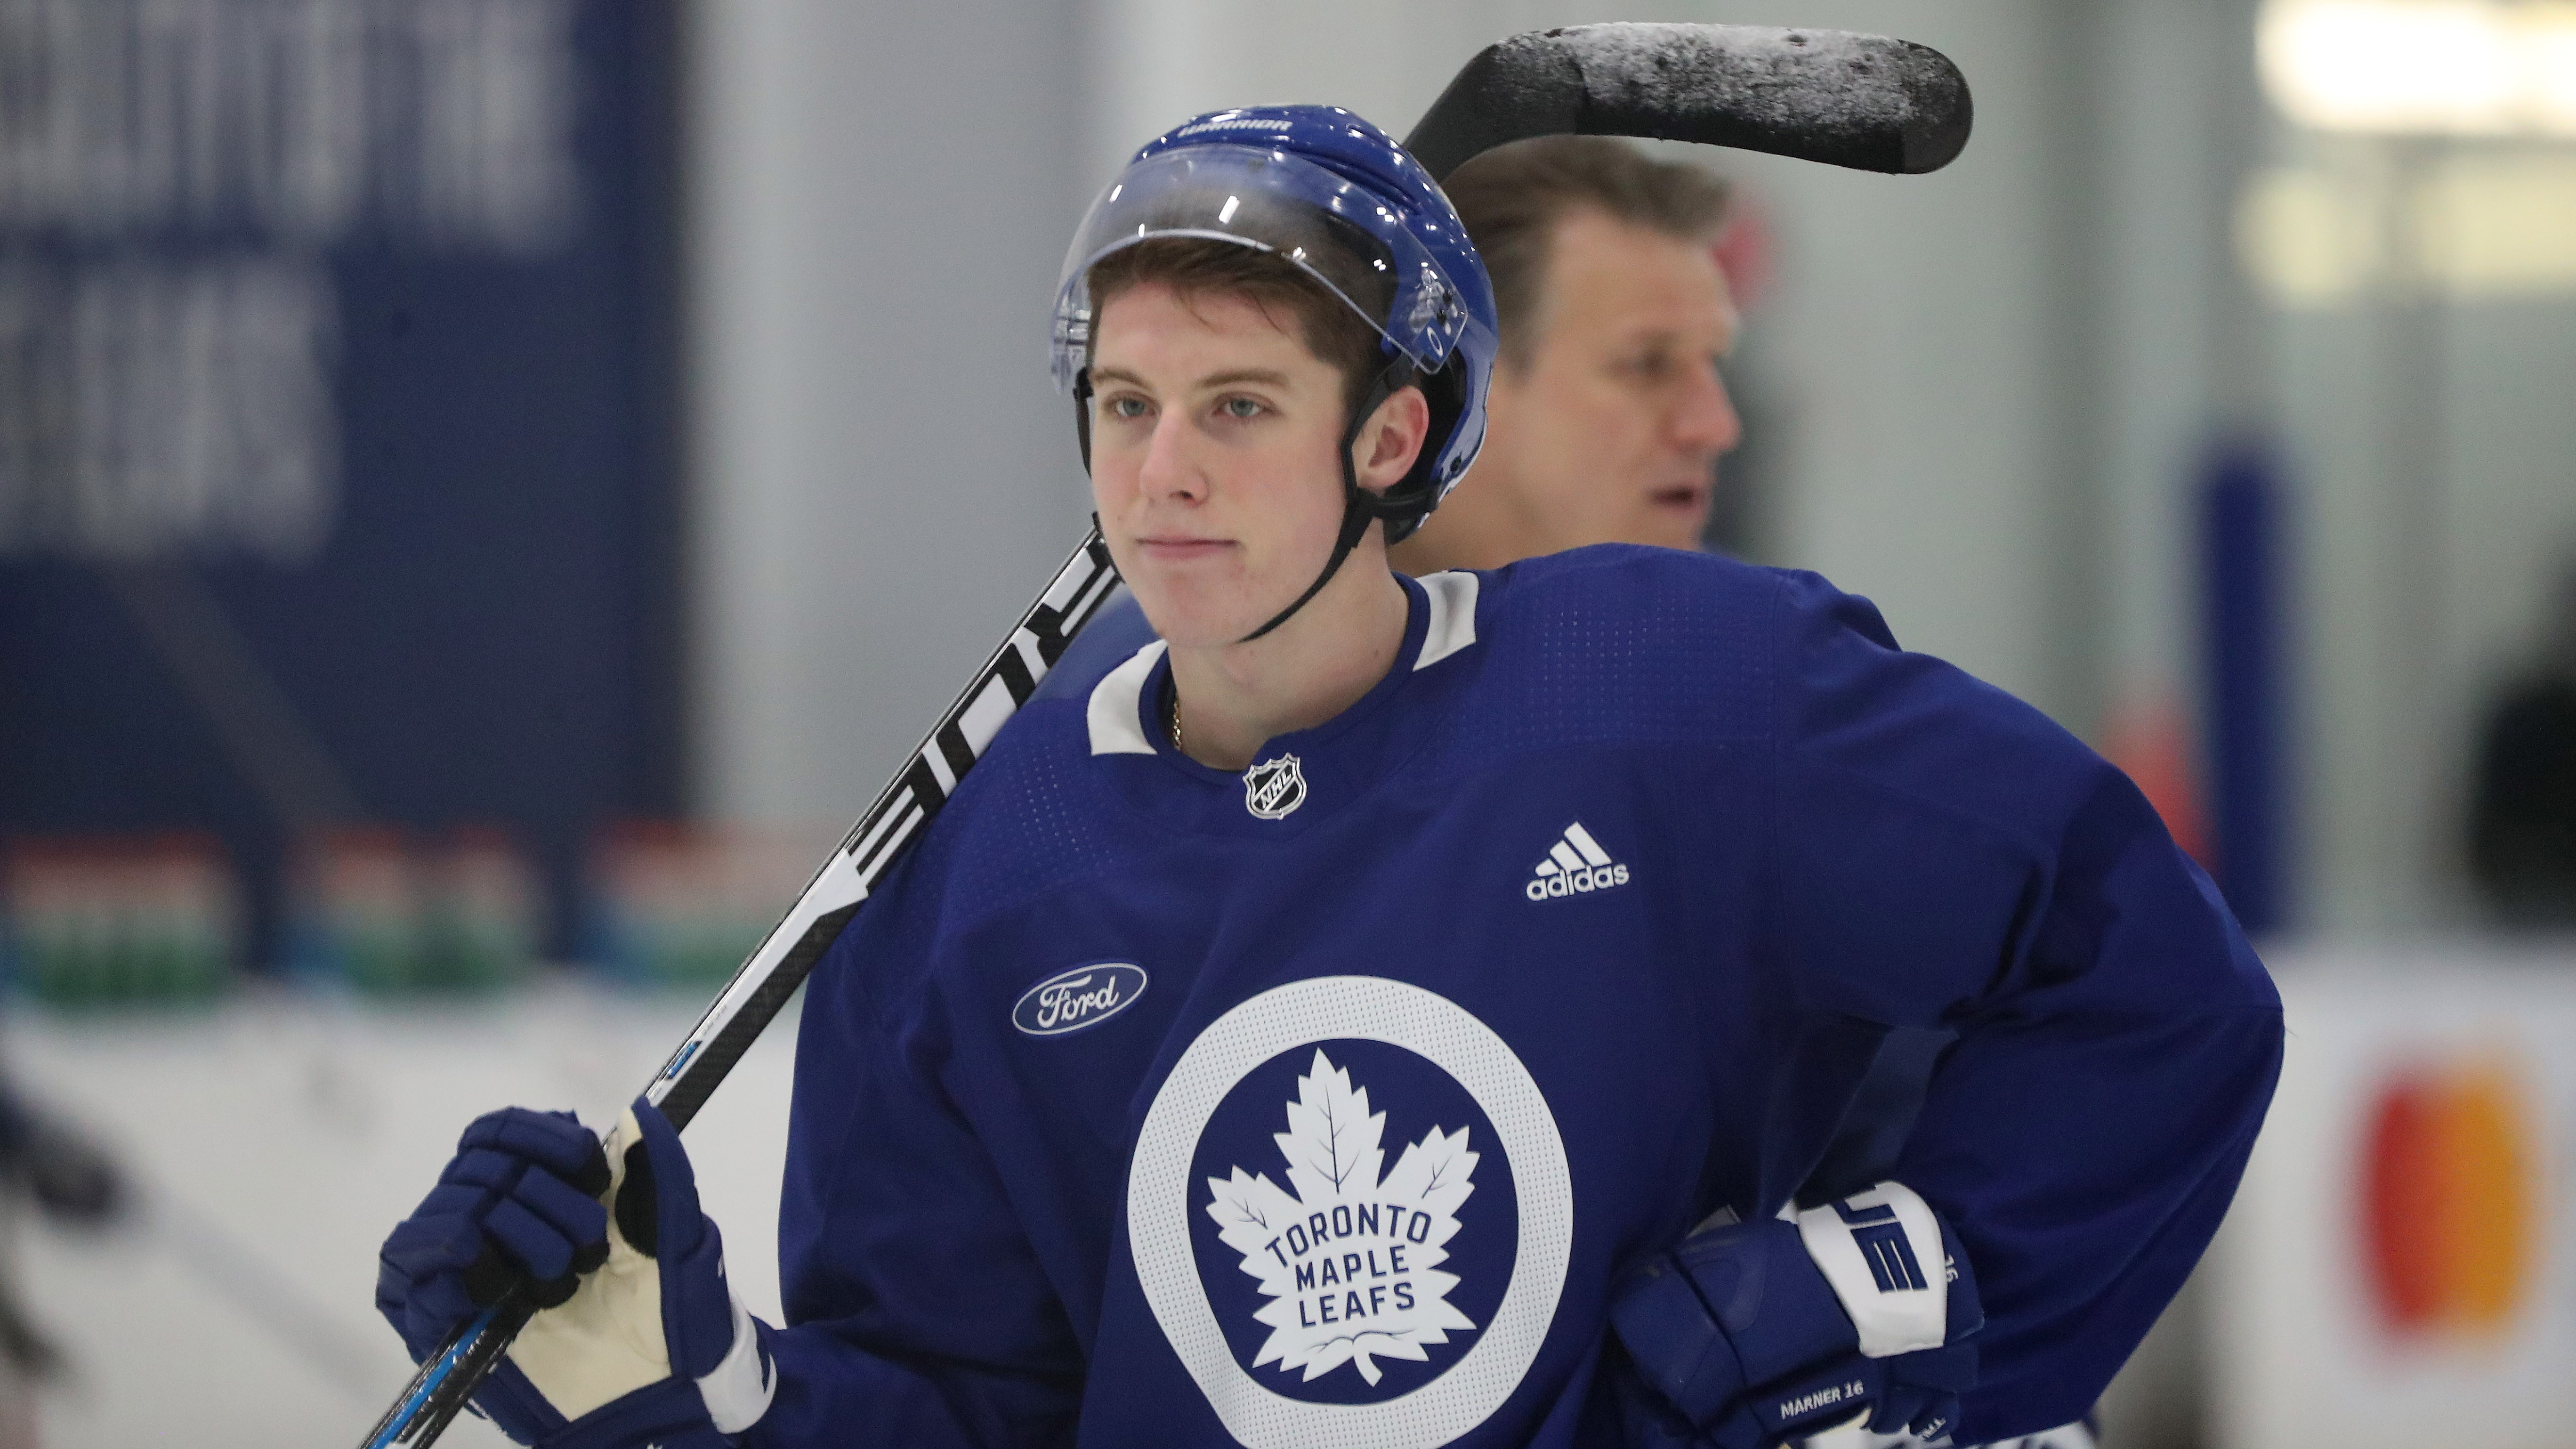 Is Leafs Mitch Marner a $13 million-a-year player? - NHL Trade Rumors